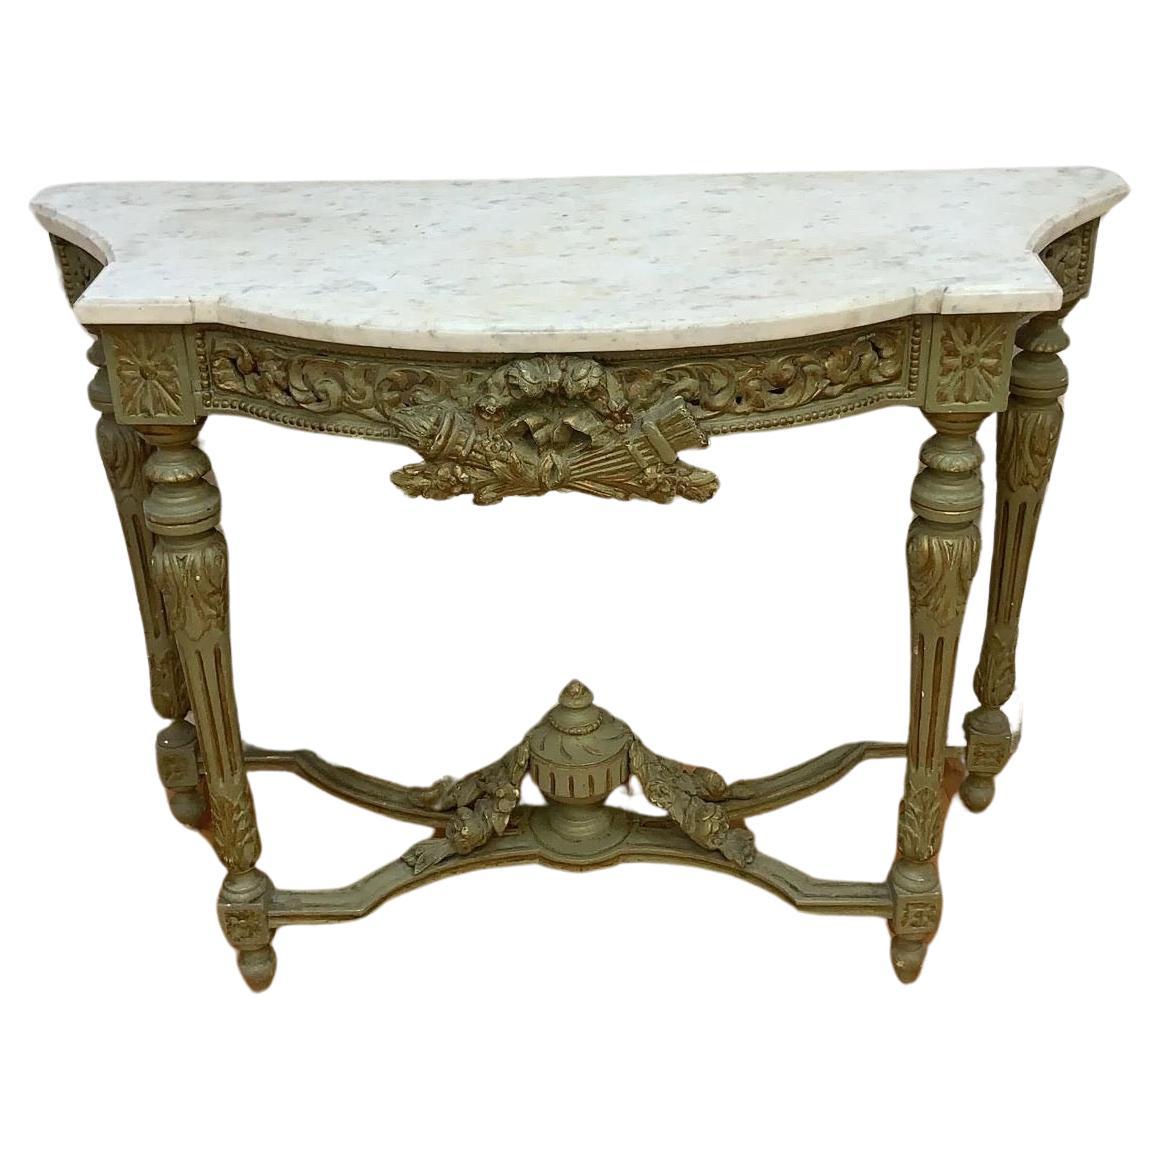 Vintage French Neoclassical Green Painted Console w/ Italian Carrara Marble Top